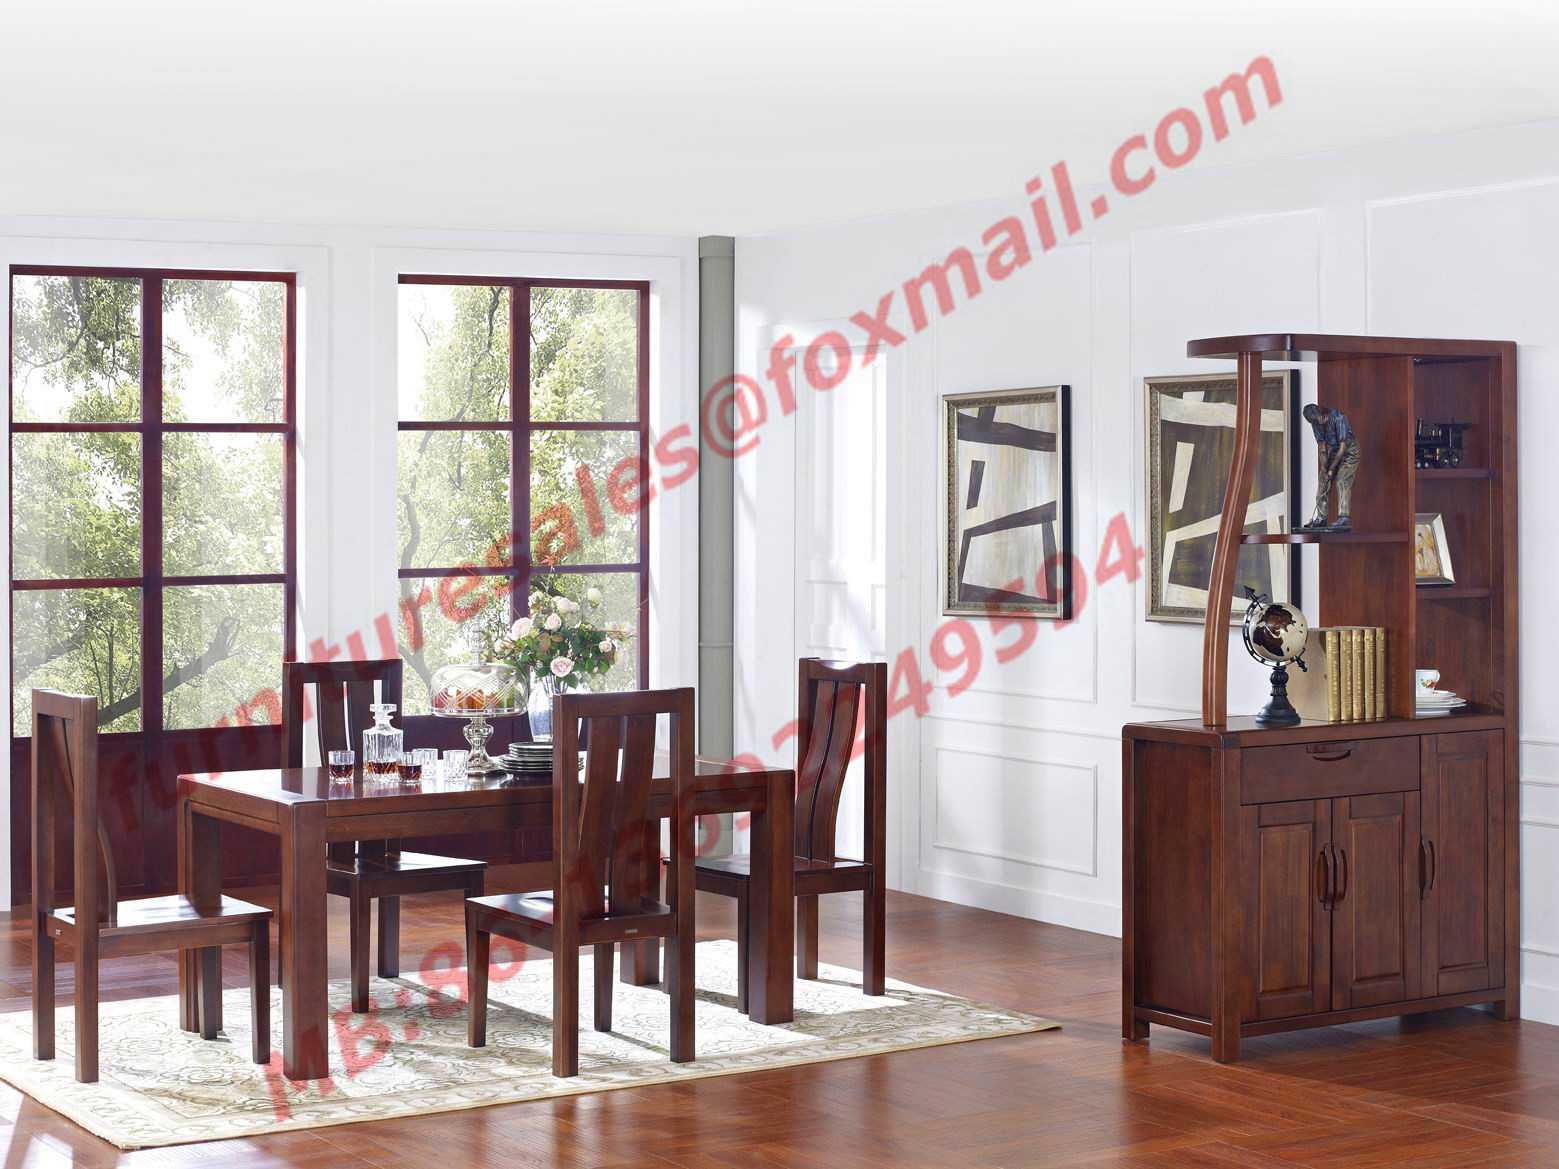  Rectangular Table made by Solid Wooden in Dining Room Set Manufactures